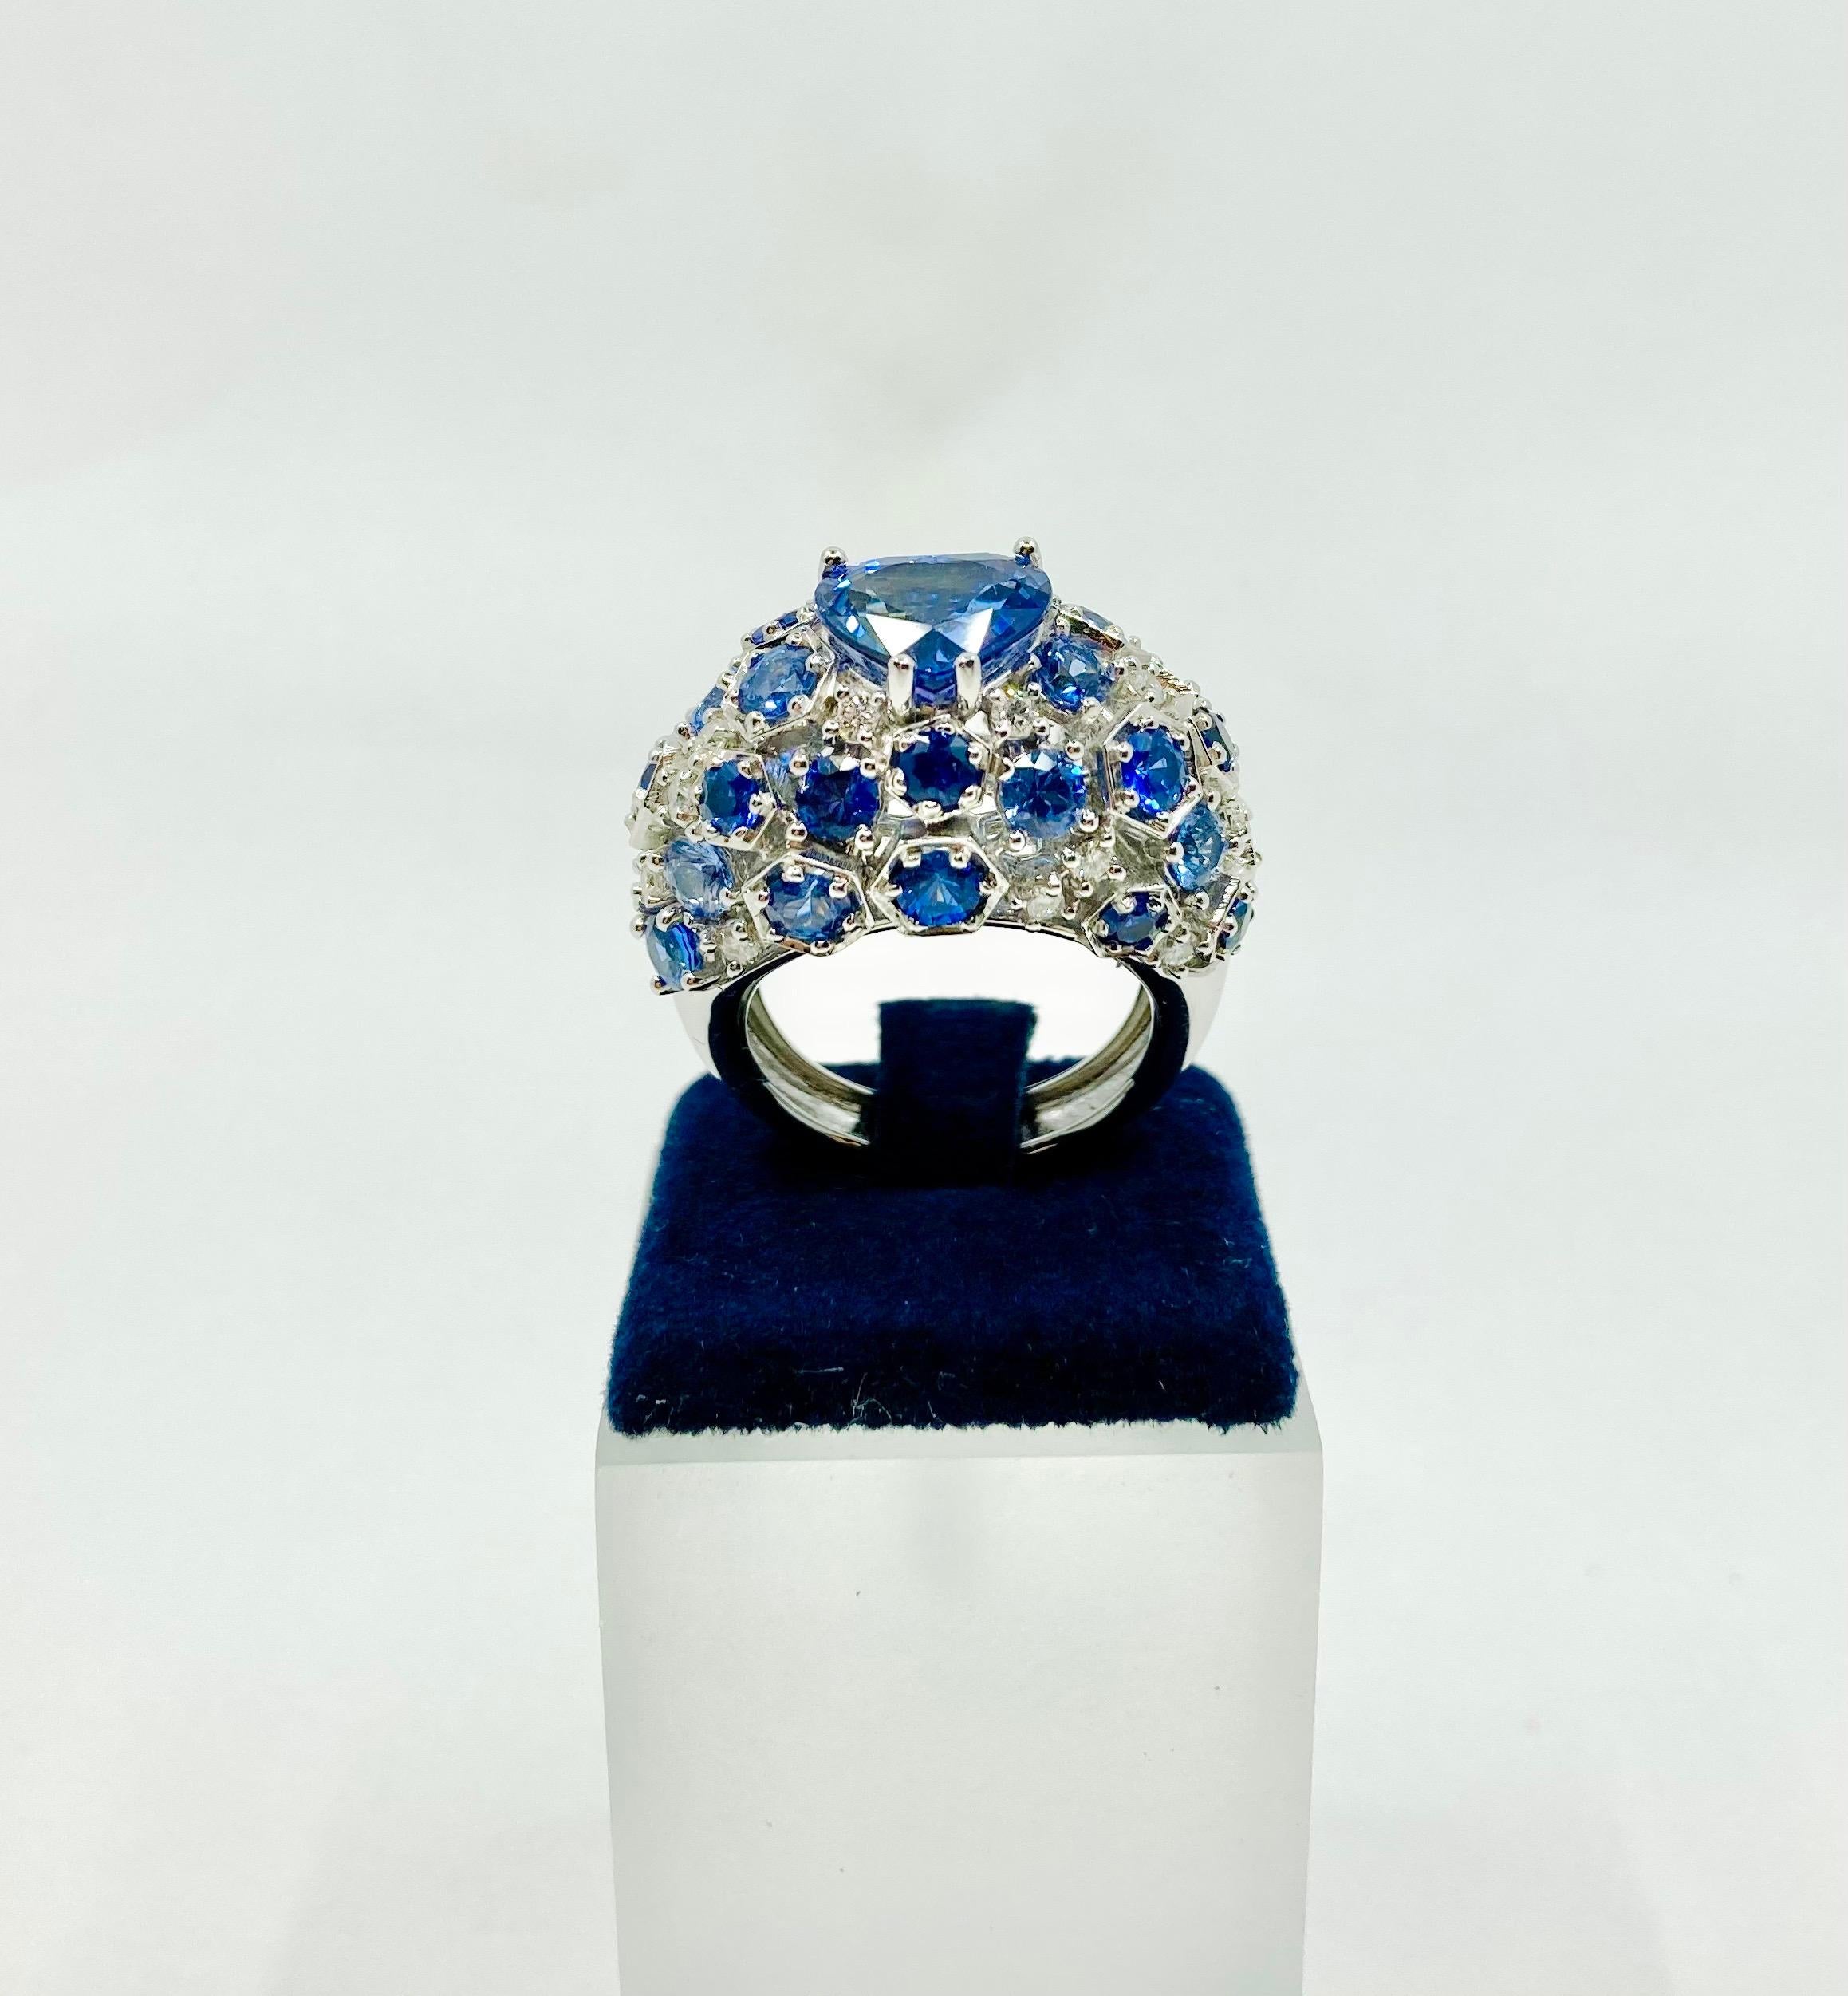 Timeless stunning White Gold ring, with a central heart shape Tanzanite ct. 0.54, round Blue Sapphires ct. 5.39 and Diamonds ct. 0.54, made in Italy by Roberto Casarin. 

Size: 14 EU (7 USA)

This ring might be the perfect gift for loved ones whom